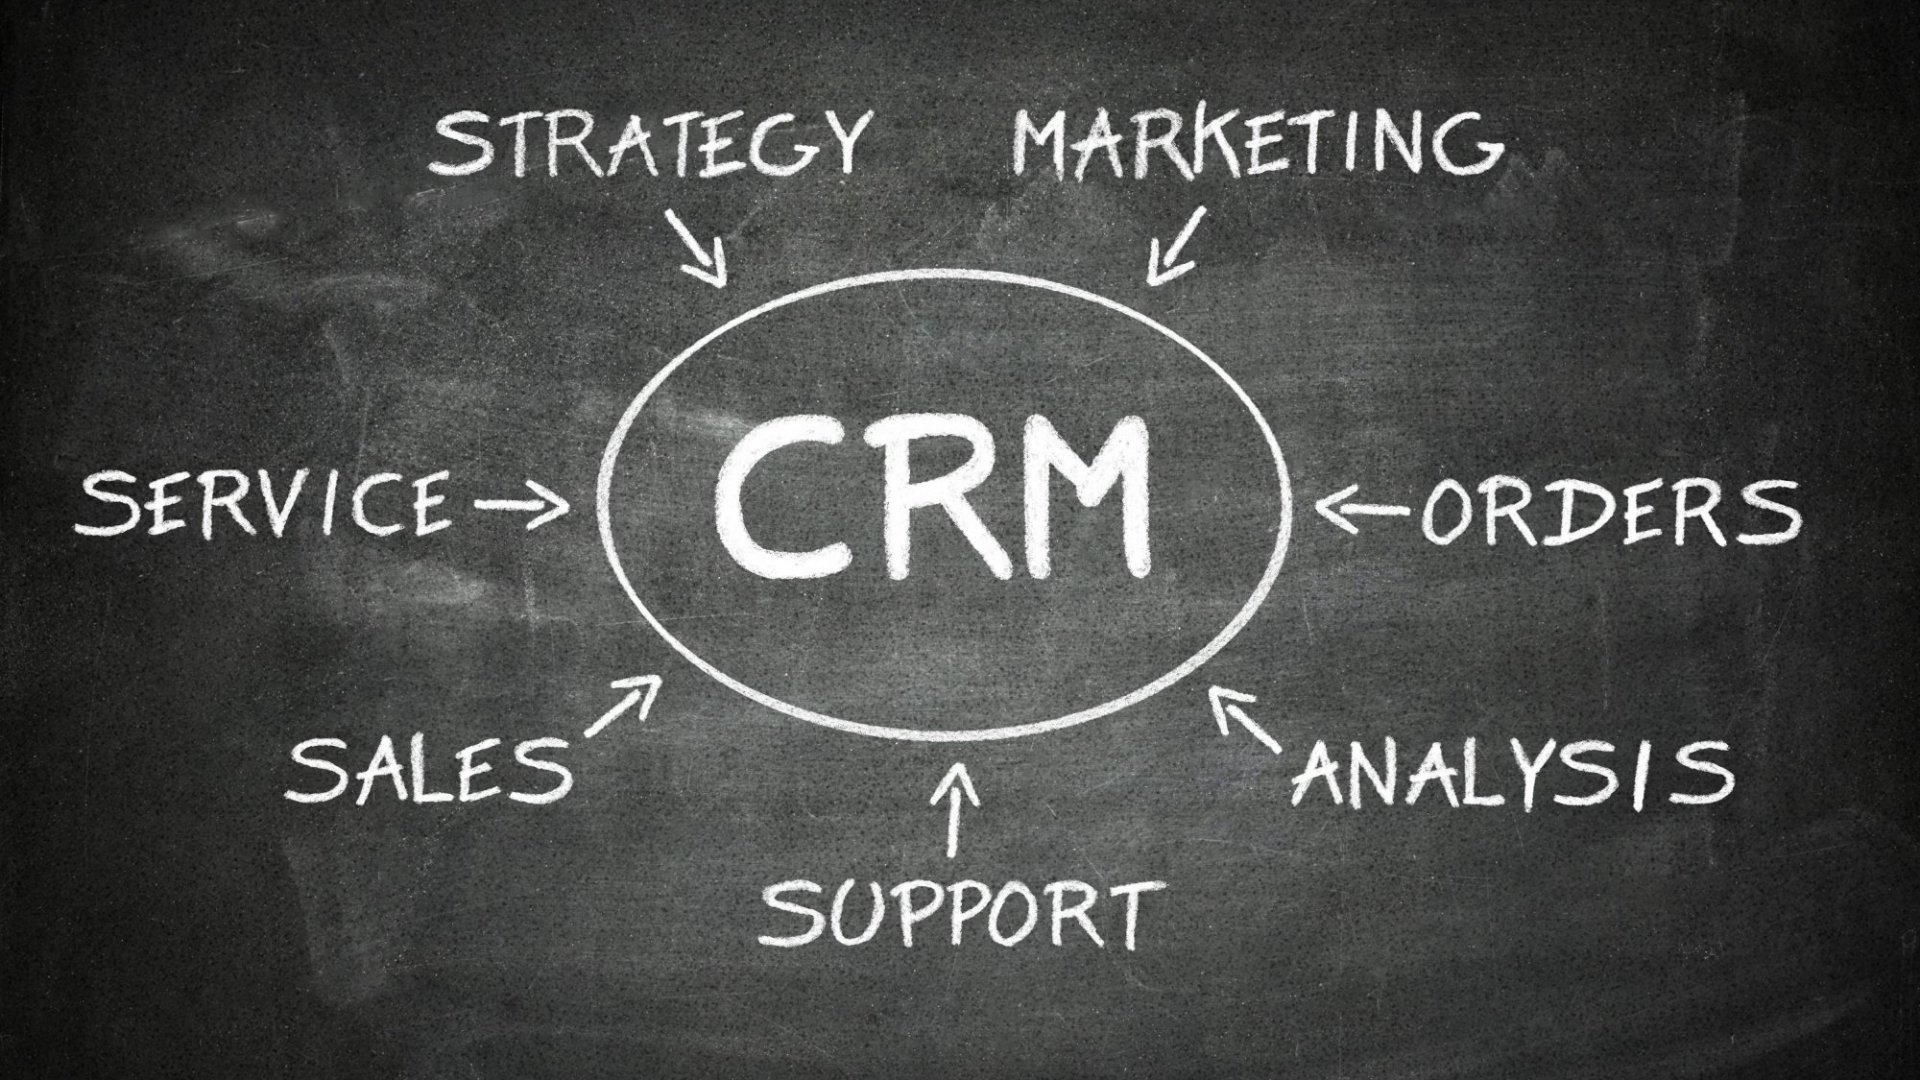 11 things about CRM you may not have known